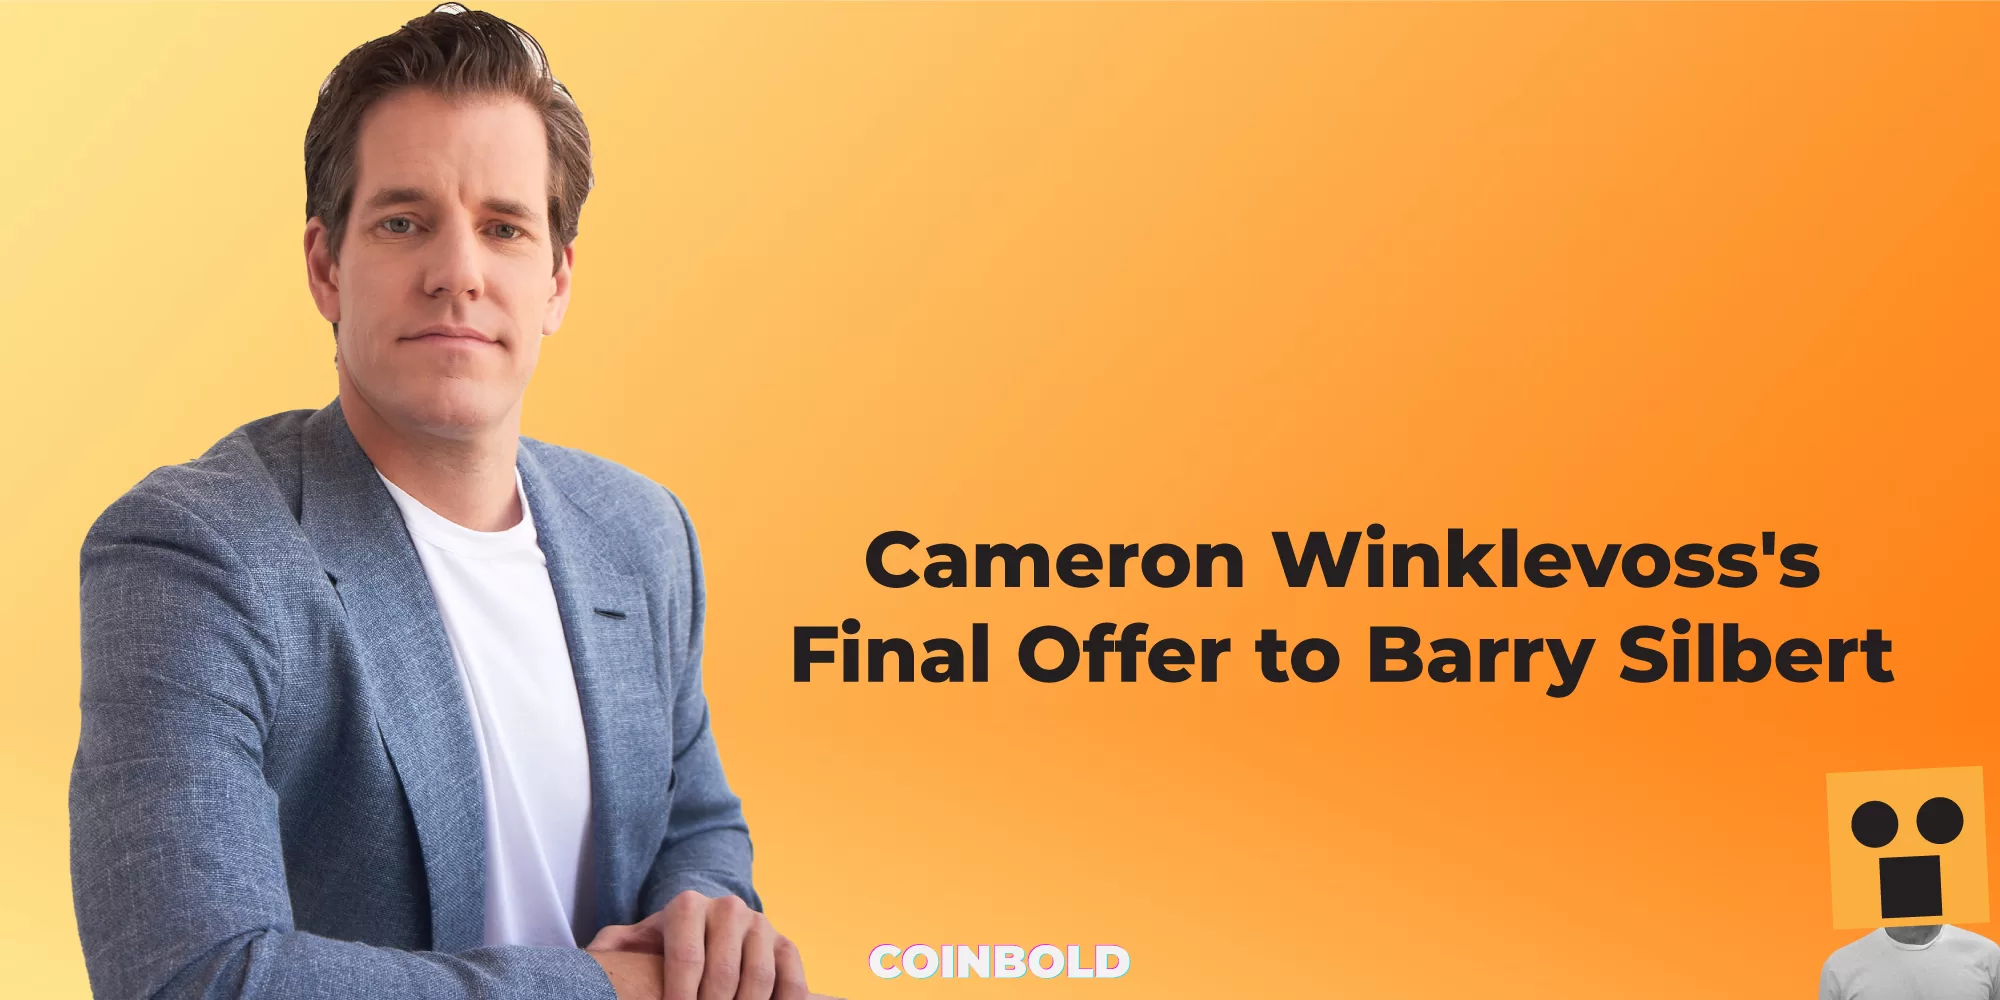 Cameron Winklevoss's Final Offer to Barry Silbert: A High-Stakes Showdown in the Cryptocurrency Industry